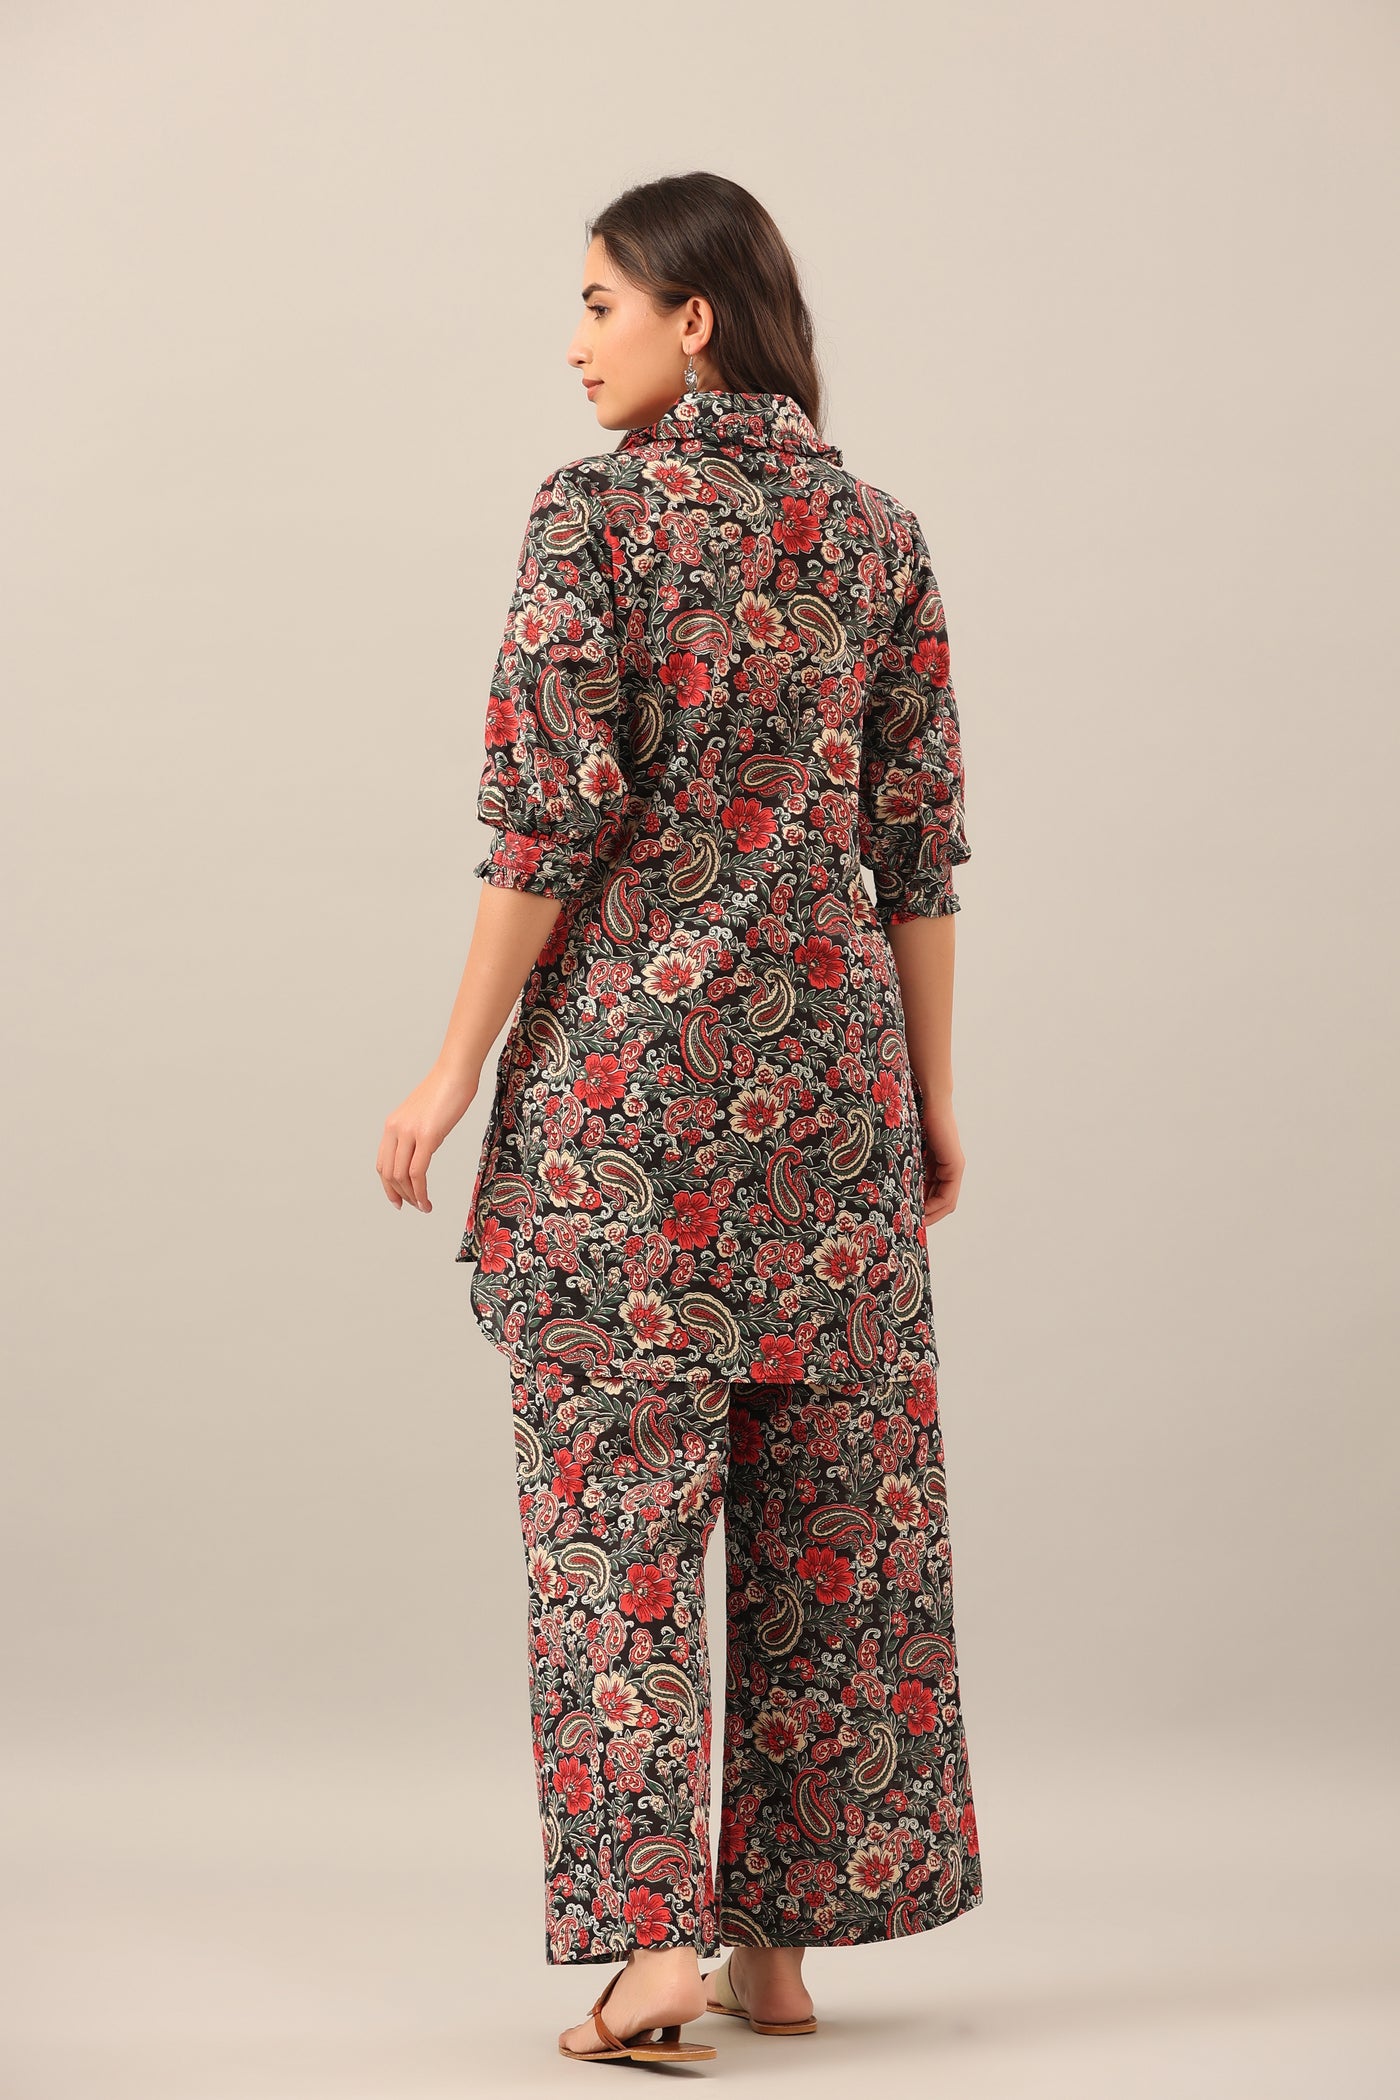 Paisley Park on Black Collared Smoked Sleeves Co-ord Set